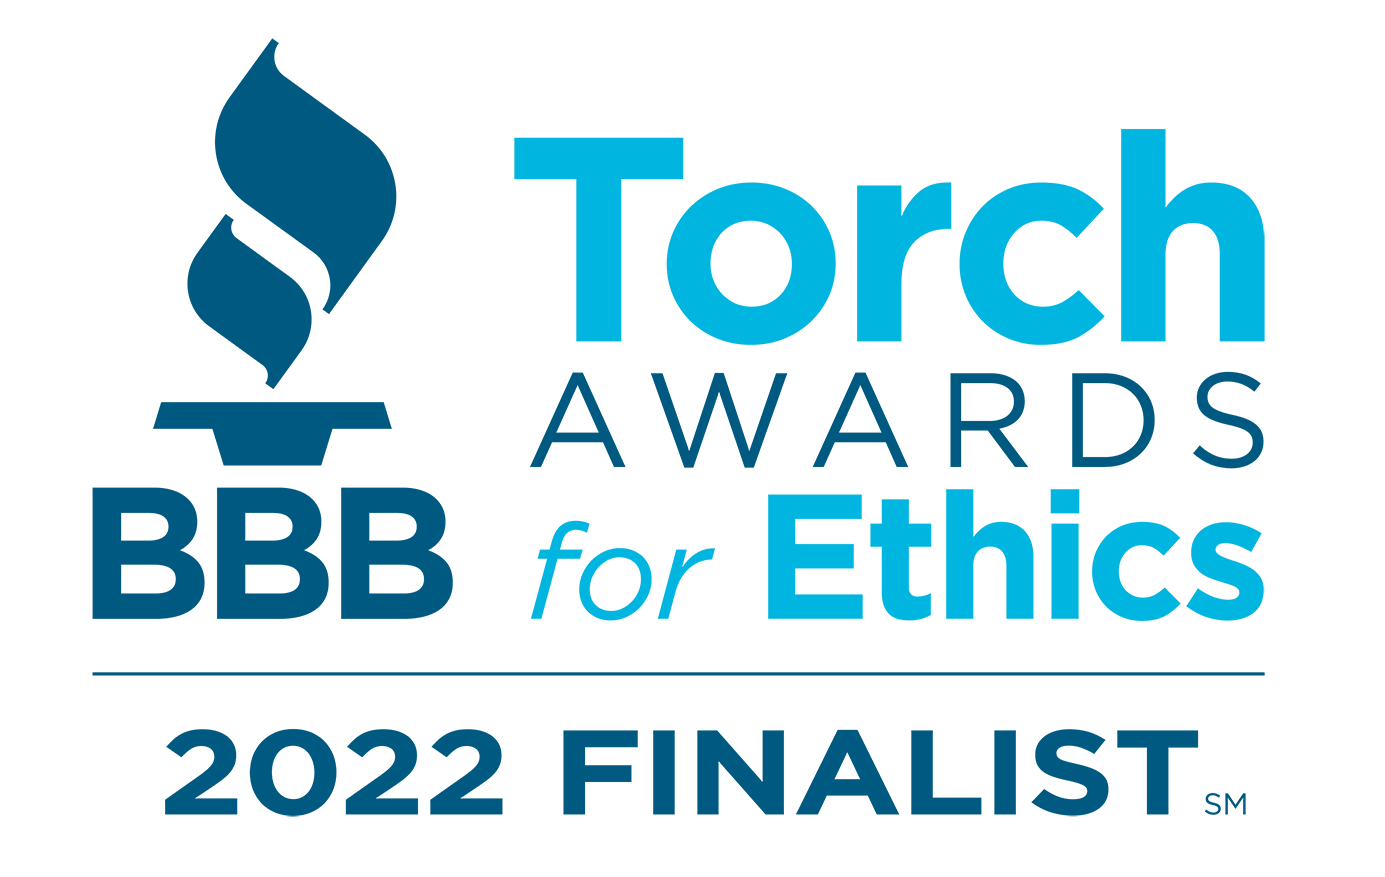 We are proud and humbled to be a finalist for the BBB Torch Awards for Ethics.